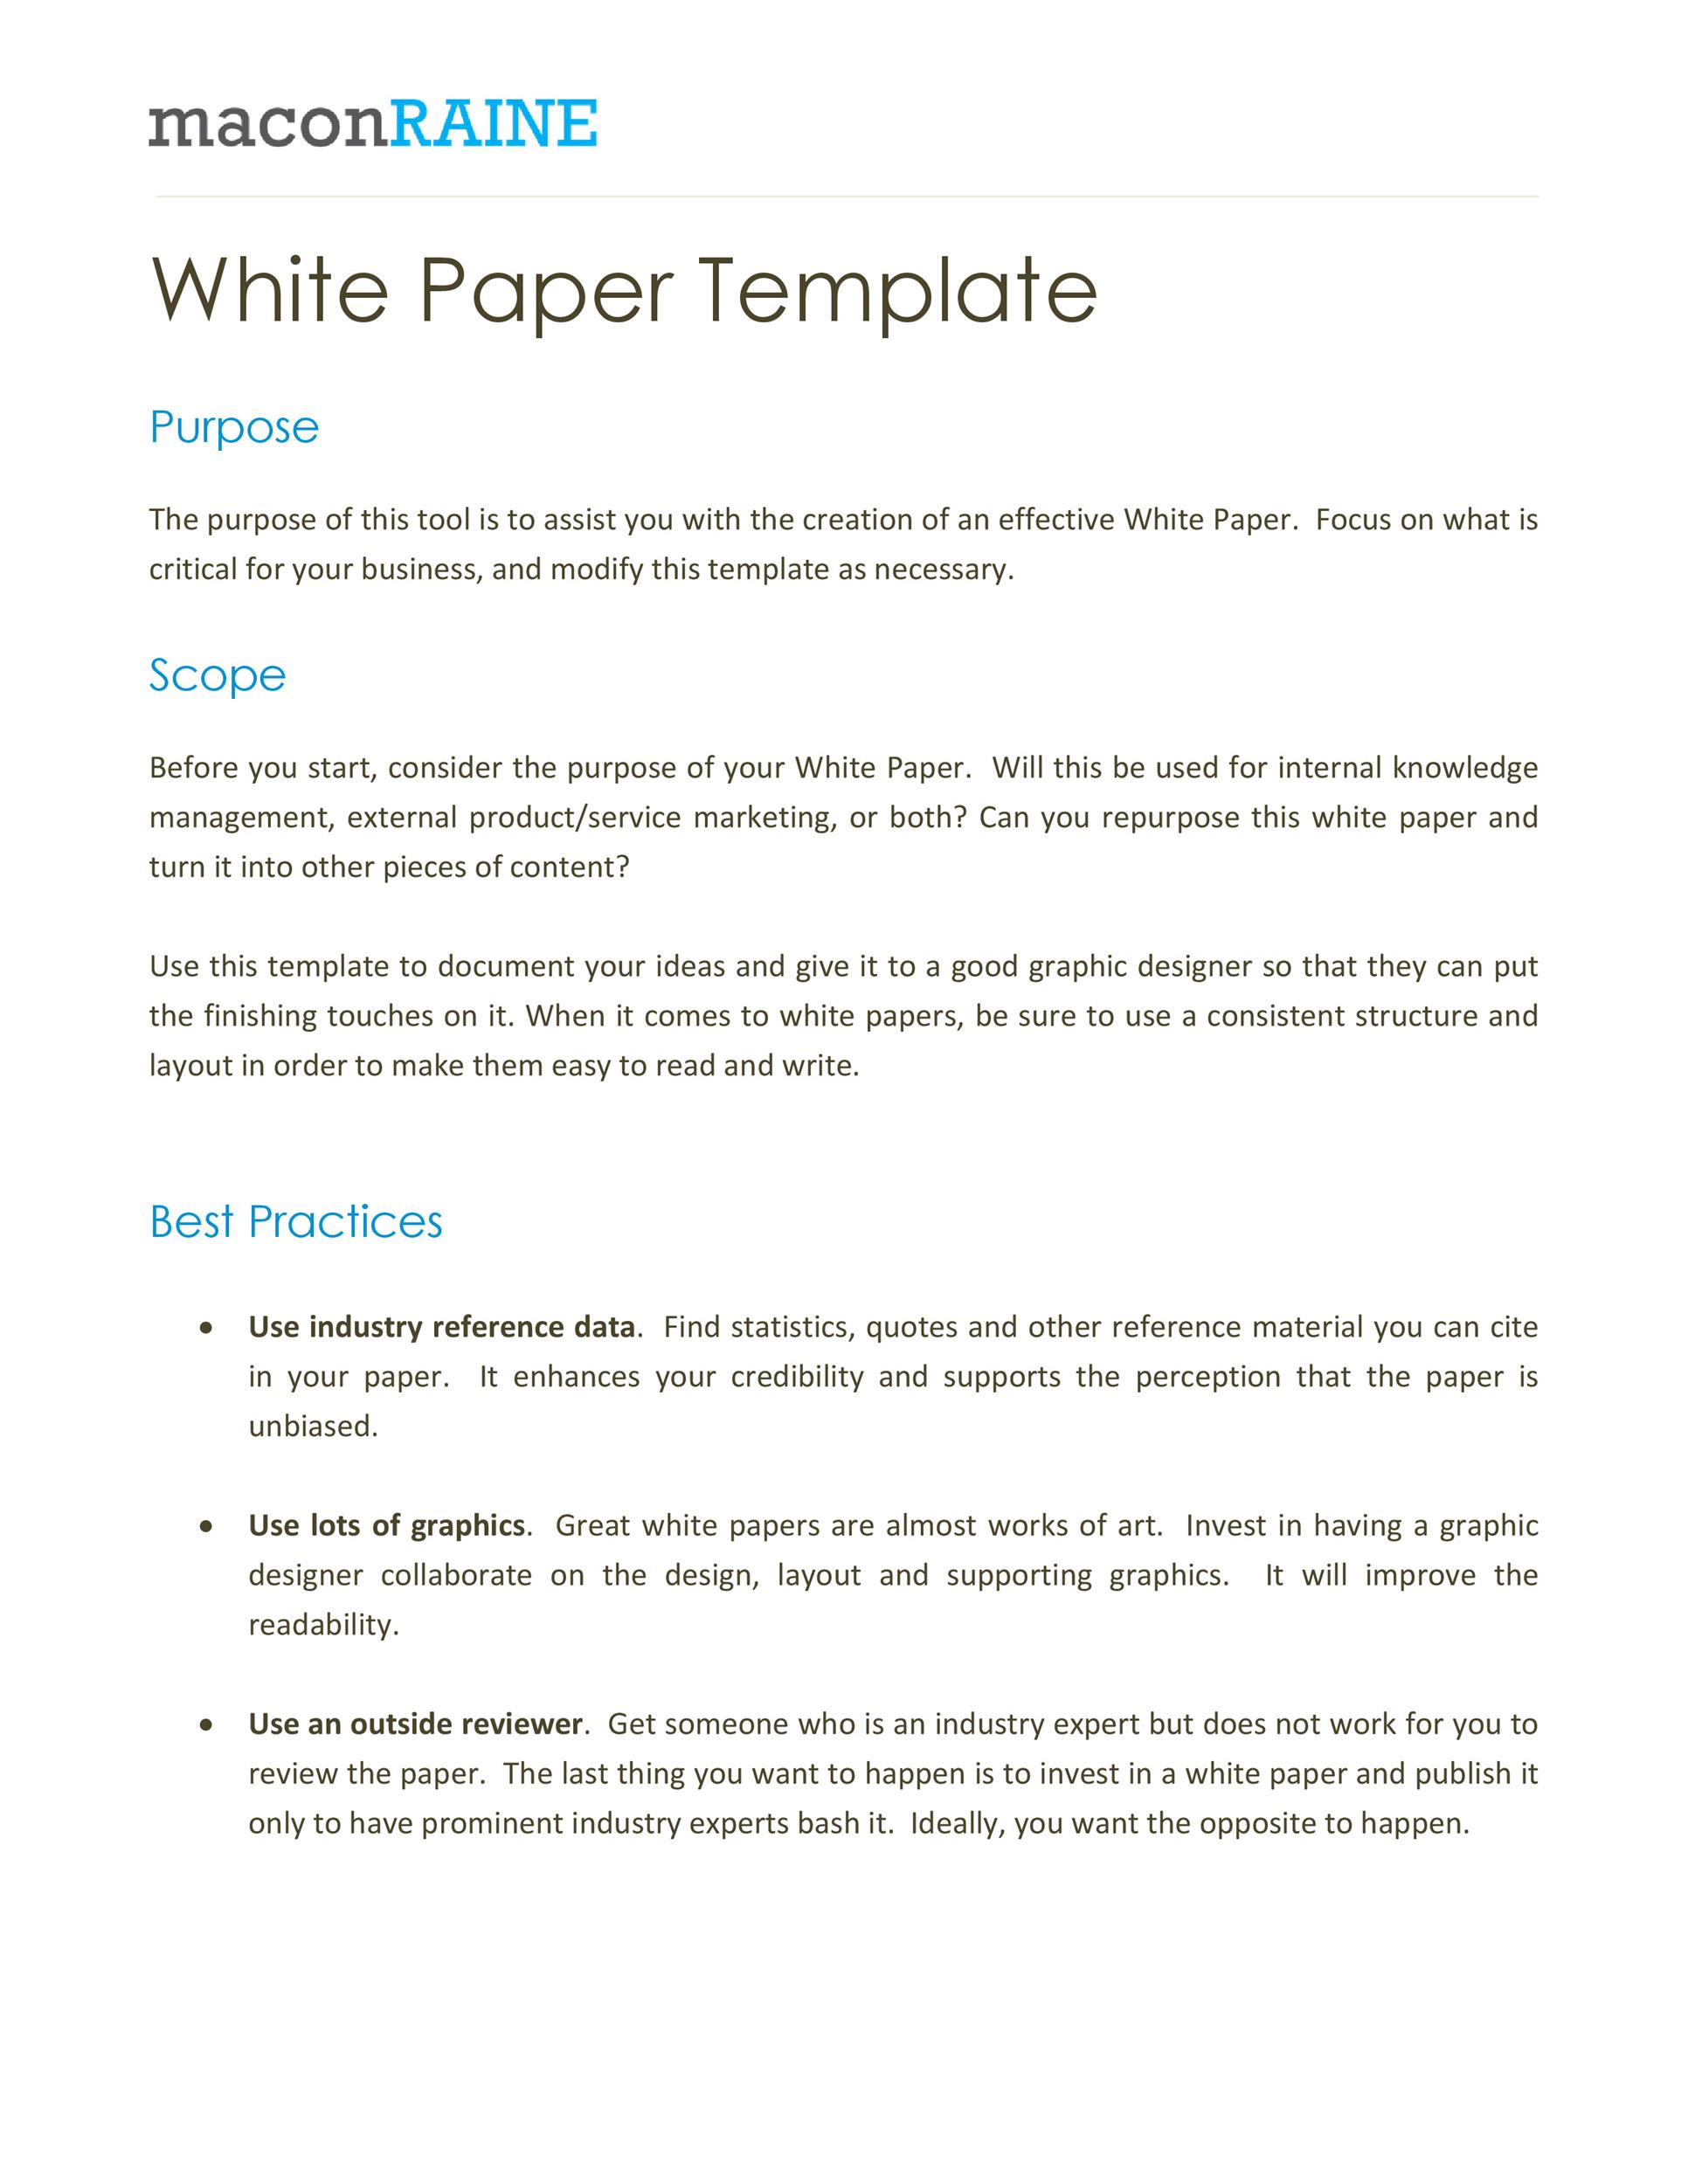 50 Best White Paper Templates Ms Word ᐅ Templatelab